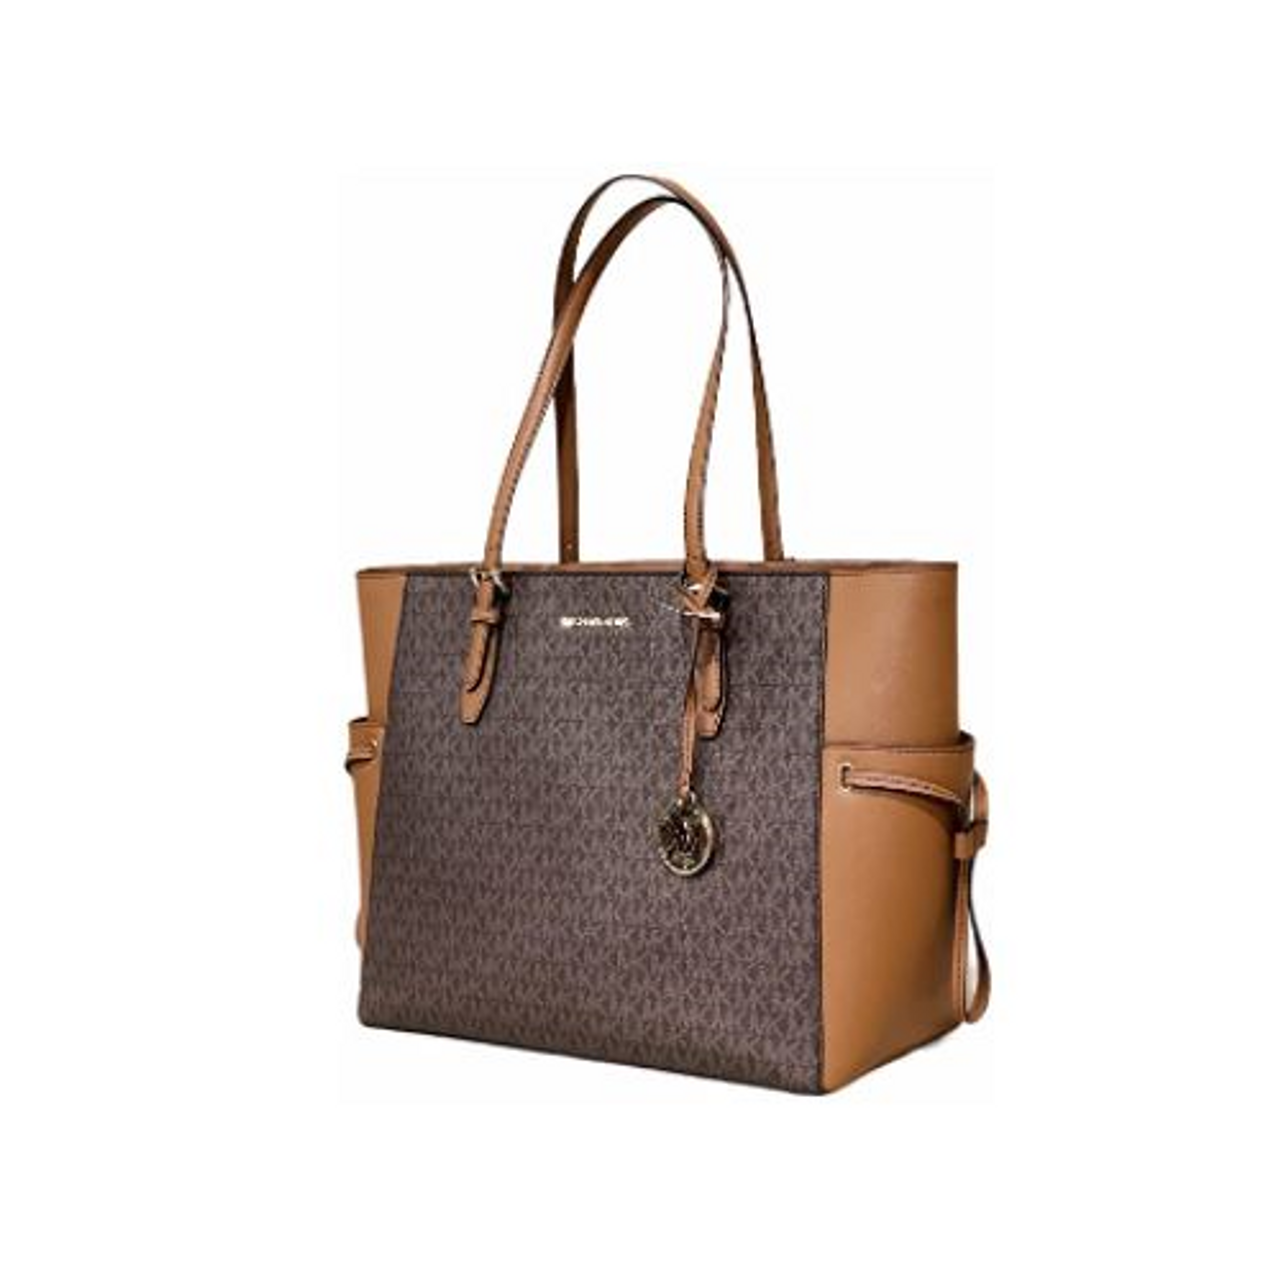 Michael Kors Bags | Michael Kors Large Gilly Tote Bag | Color: Brown/Gold | Size: Large | Rluckychance88's Closet